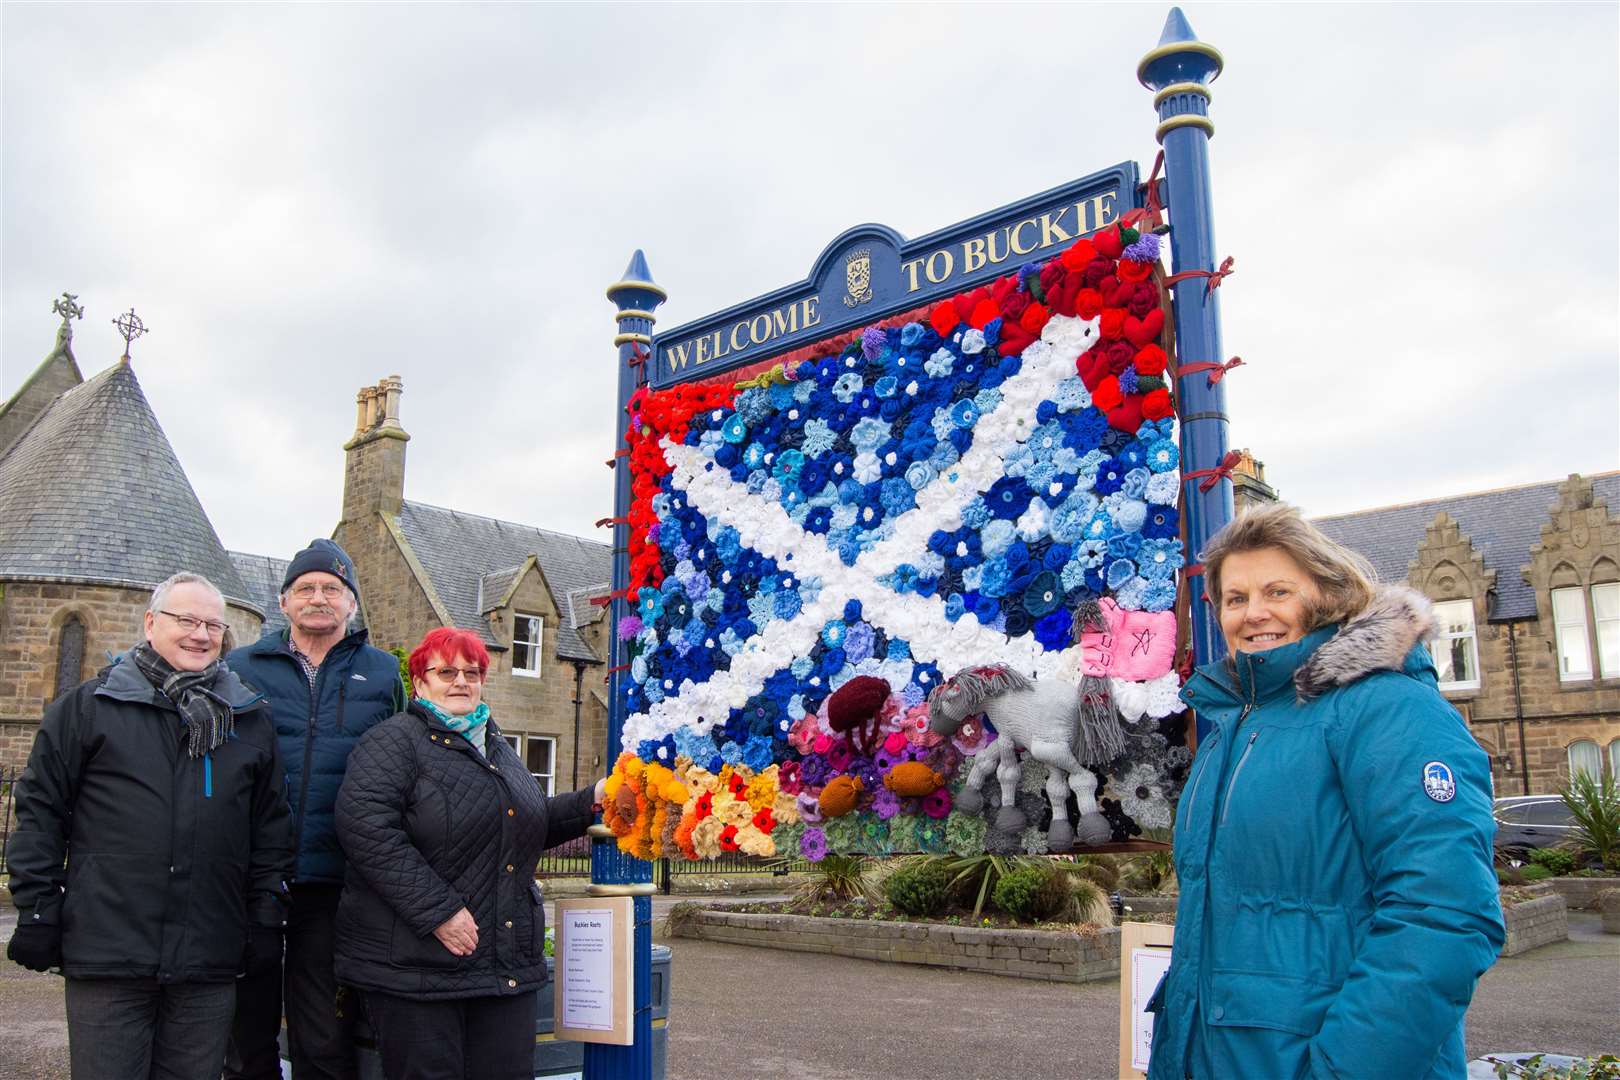 Joining Buckie's Roots chairwoman Meg Jamieson (third left) in admiring the Auld Lang Syne panel are group volunteers (from left) Gifford Leslie, Archie Jamieson and Sandra Simpson. Picture: Daniel Forsyth